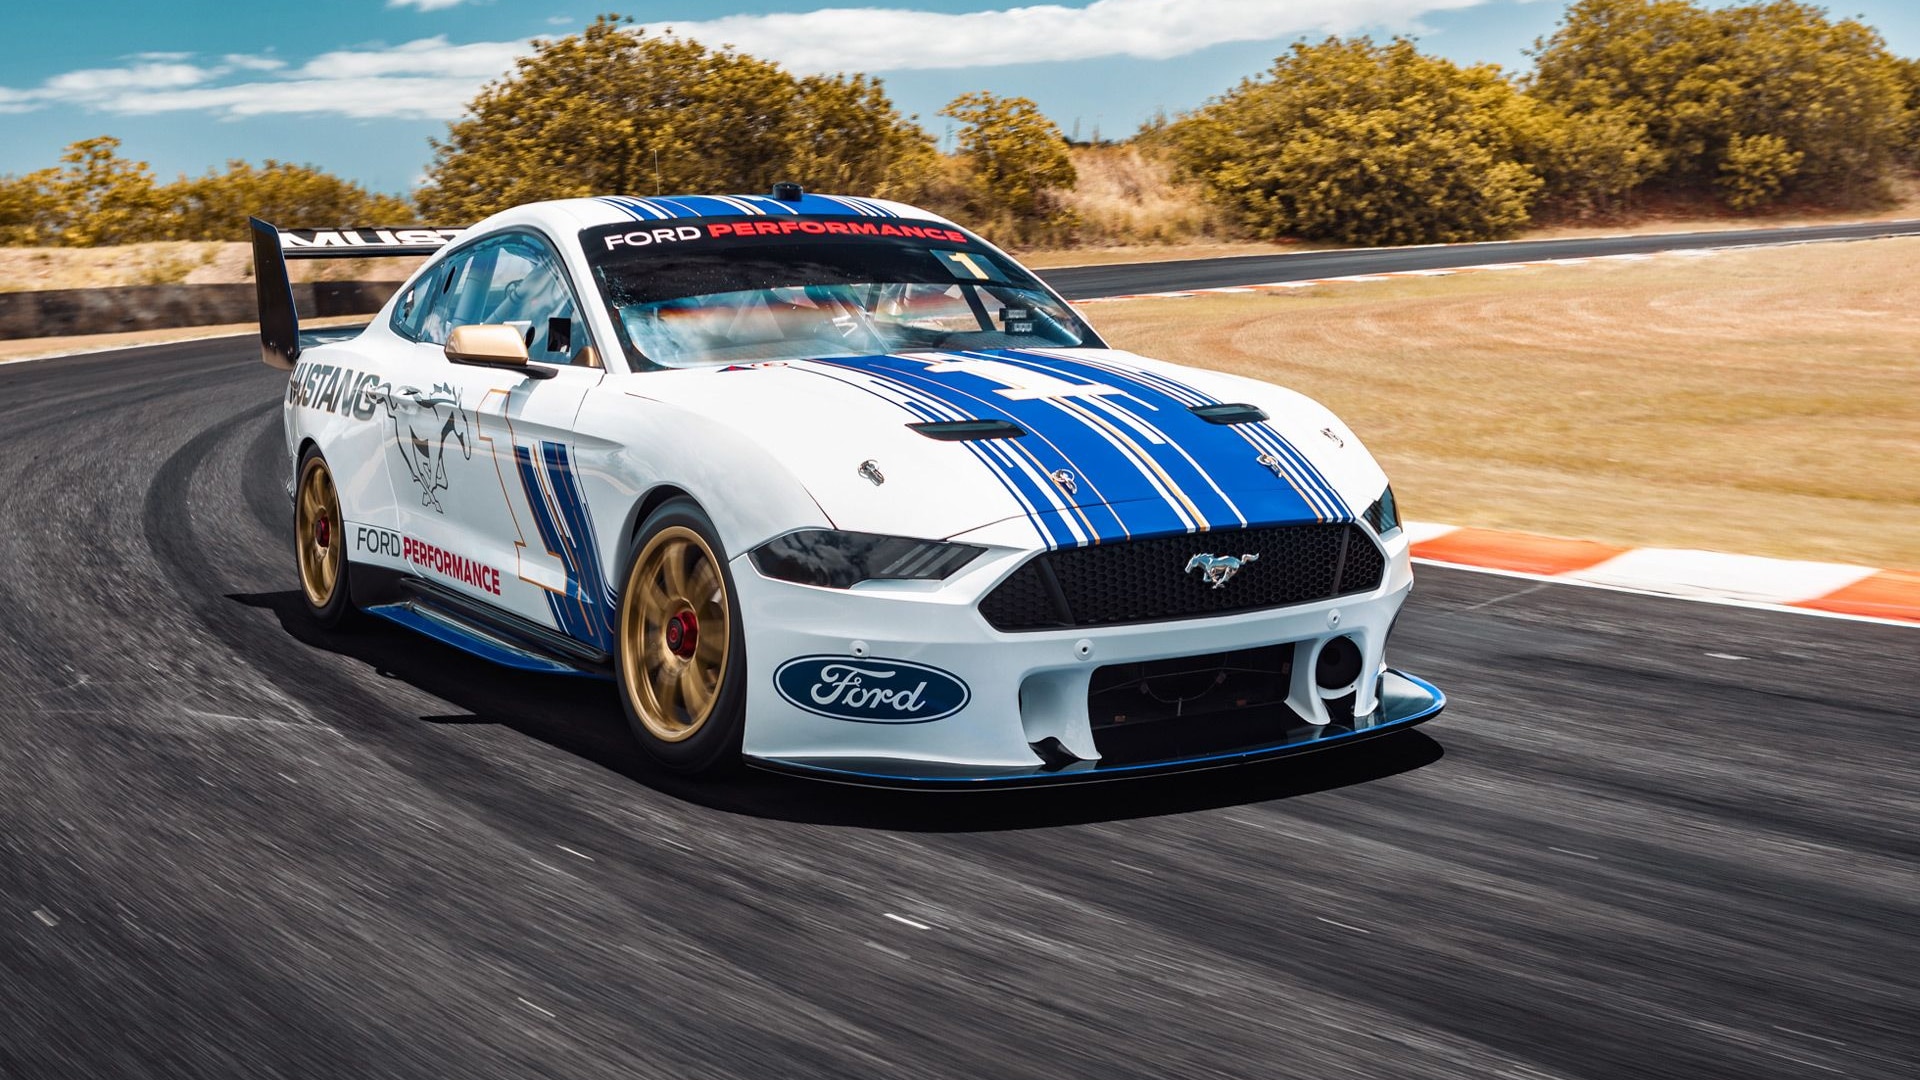 2019 Ford Mustang Australia Supercars race car